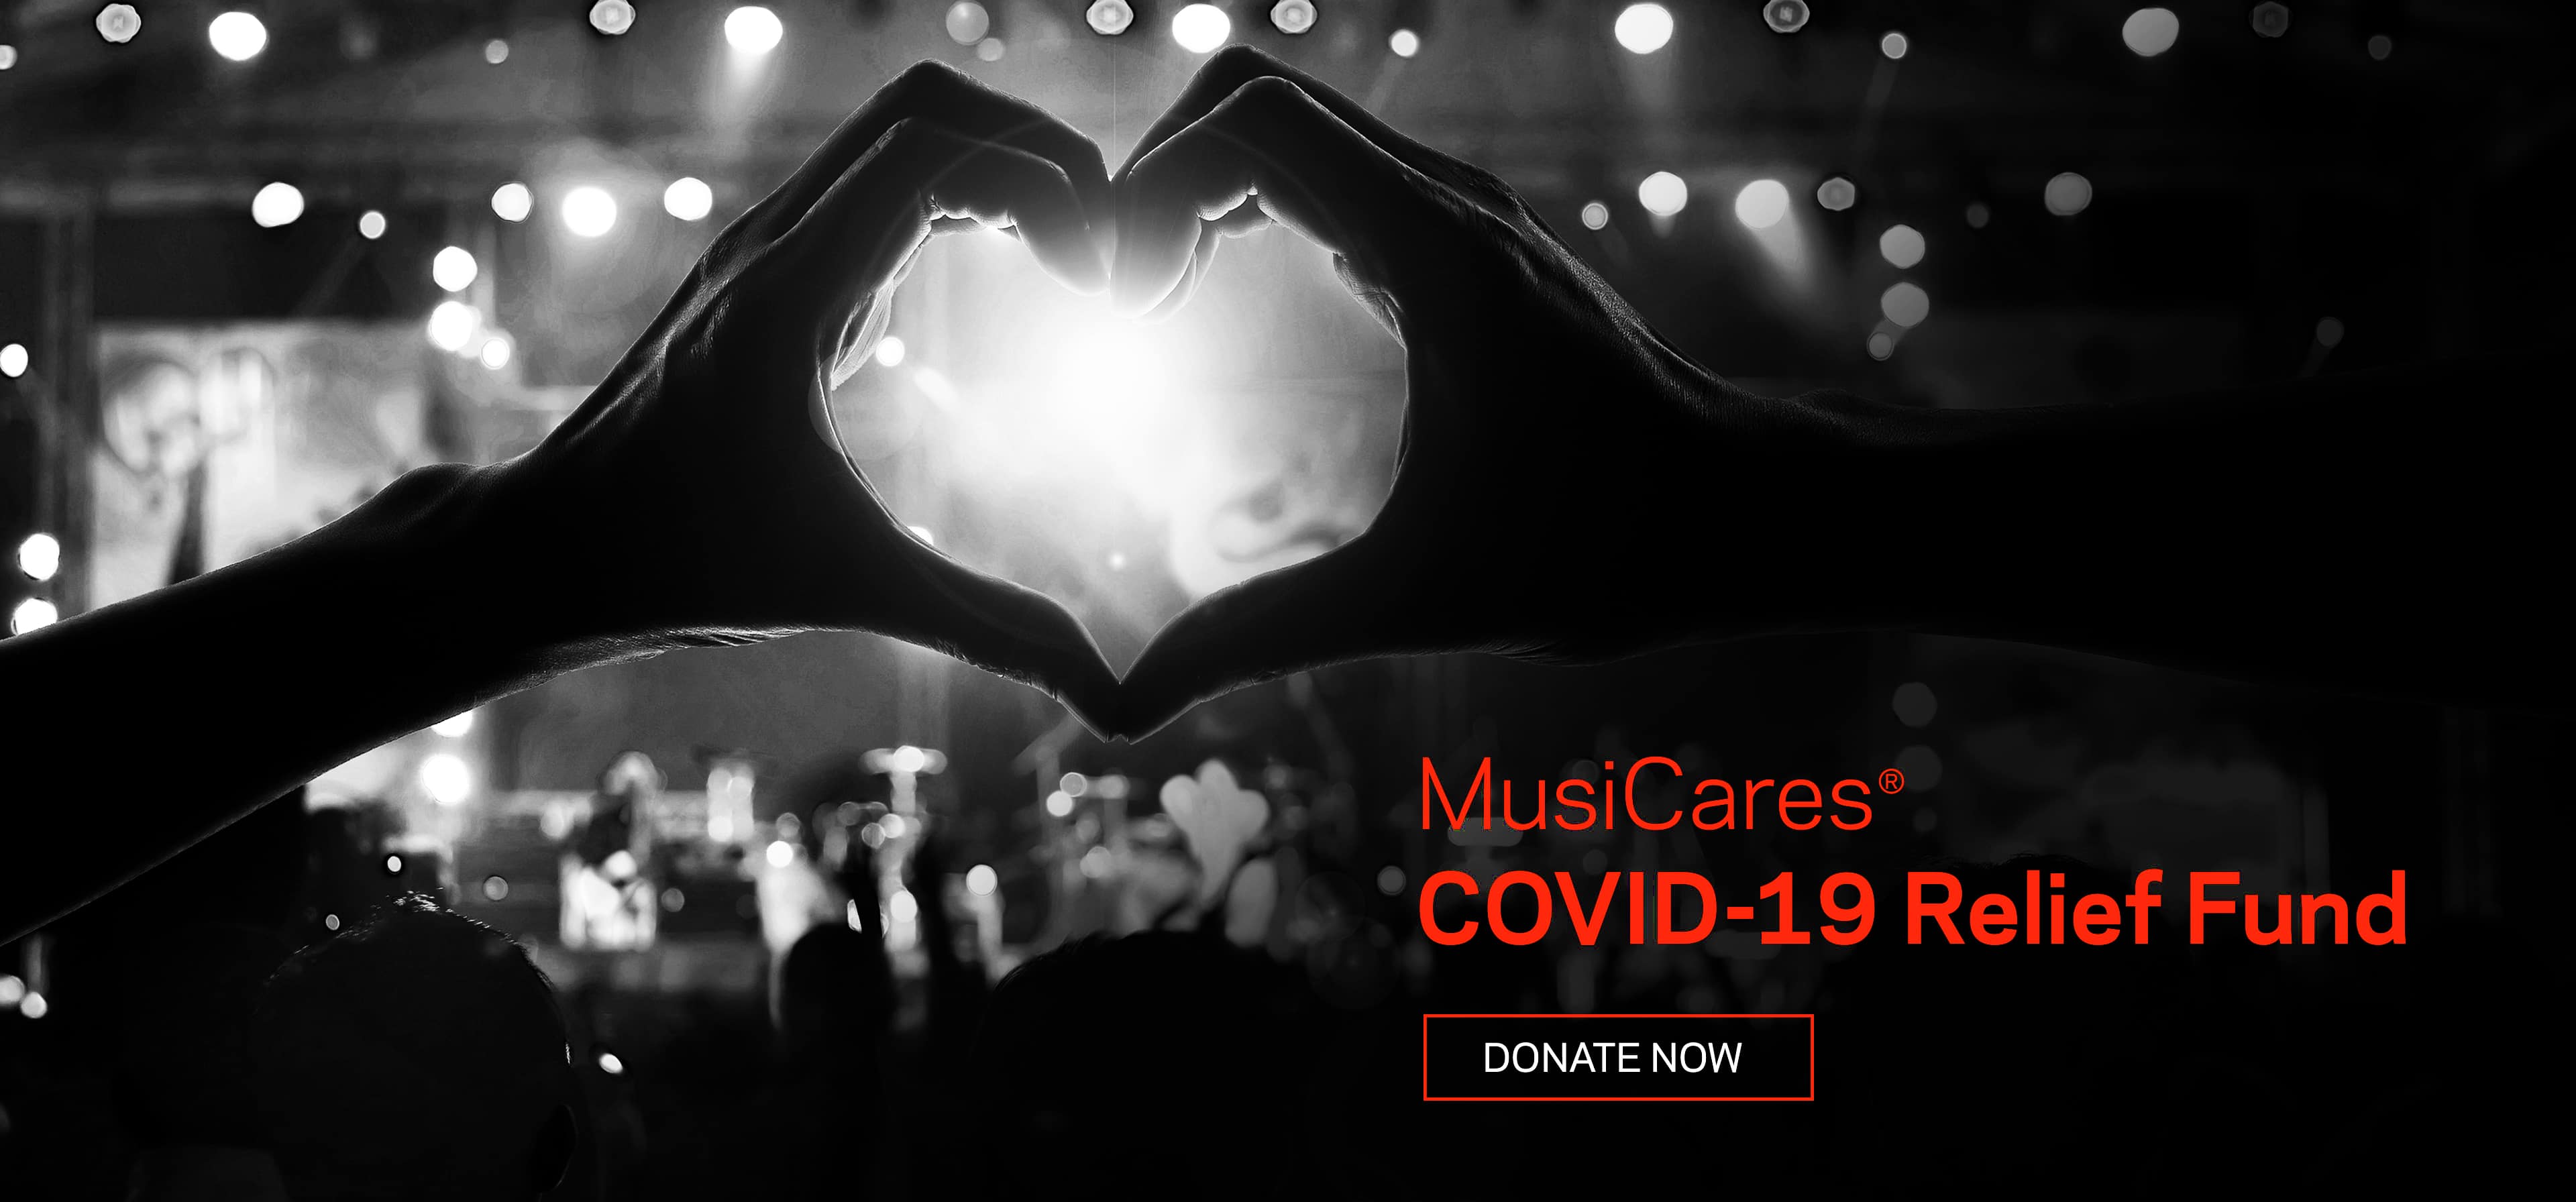 MusiCares/The Recording Academy Offering Help to Those In Need with their COVID-19 Relief Fund.